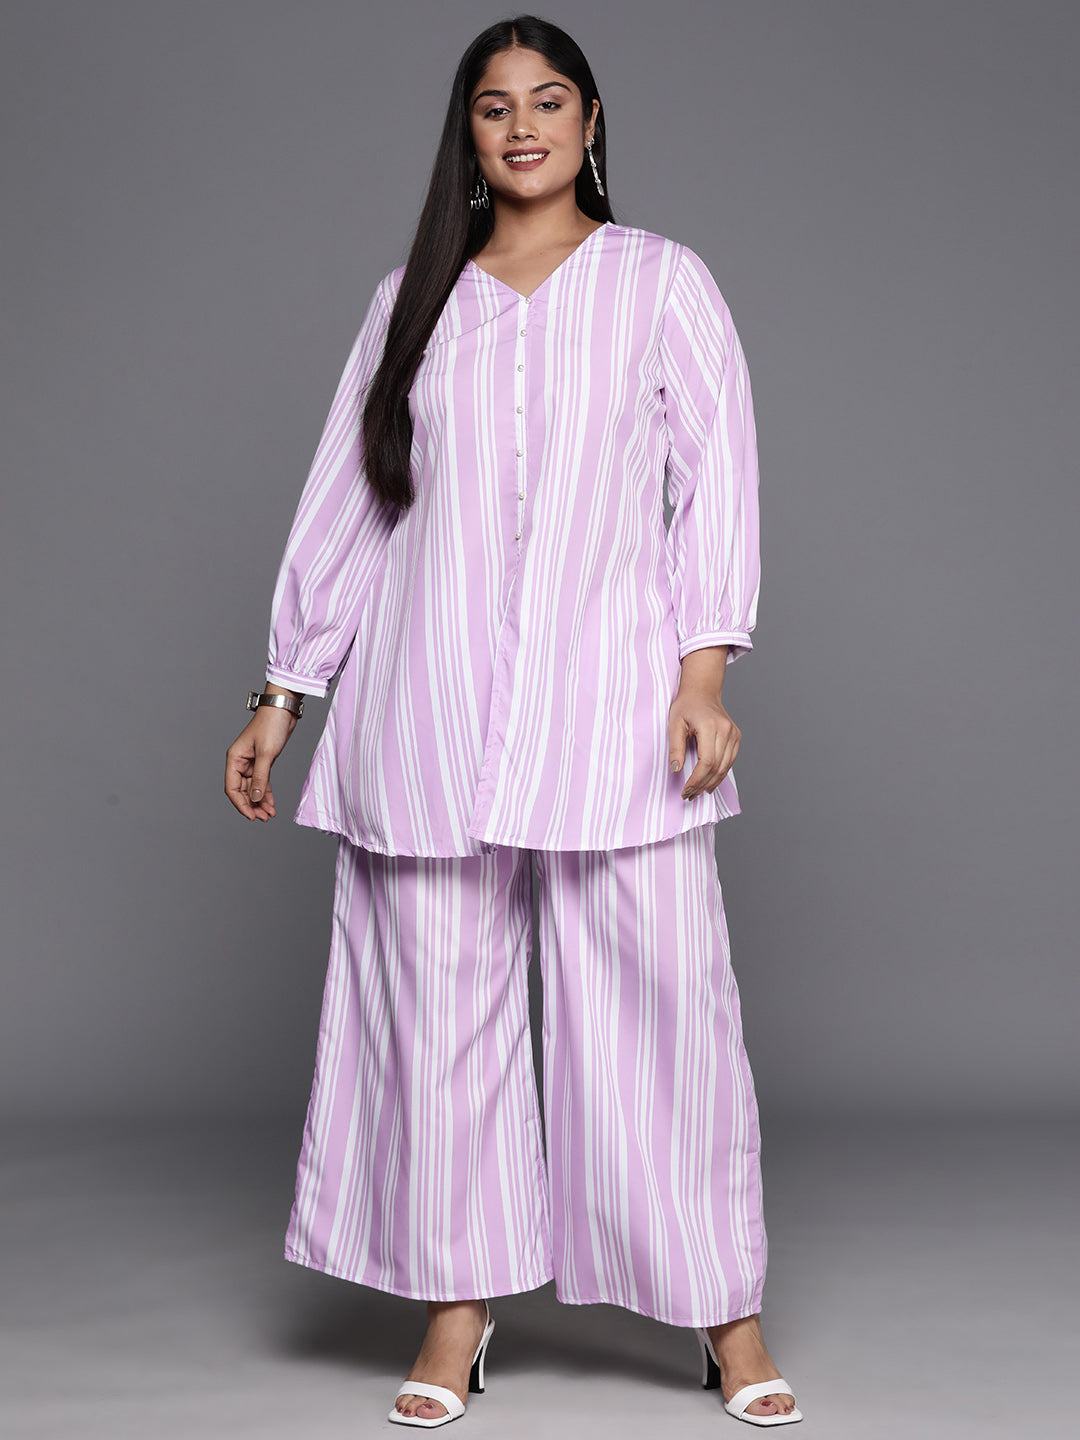 Women's Traditional Wear Co-Ods - A Plus By Ahalyaa